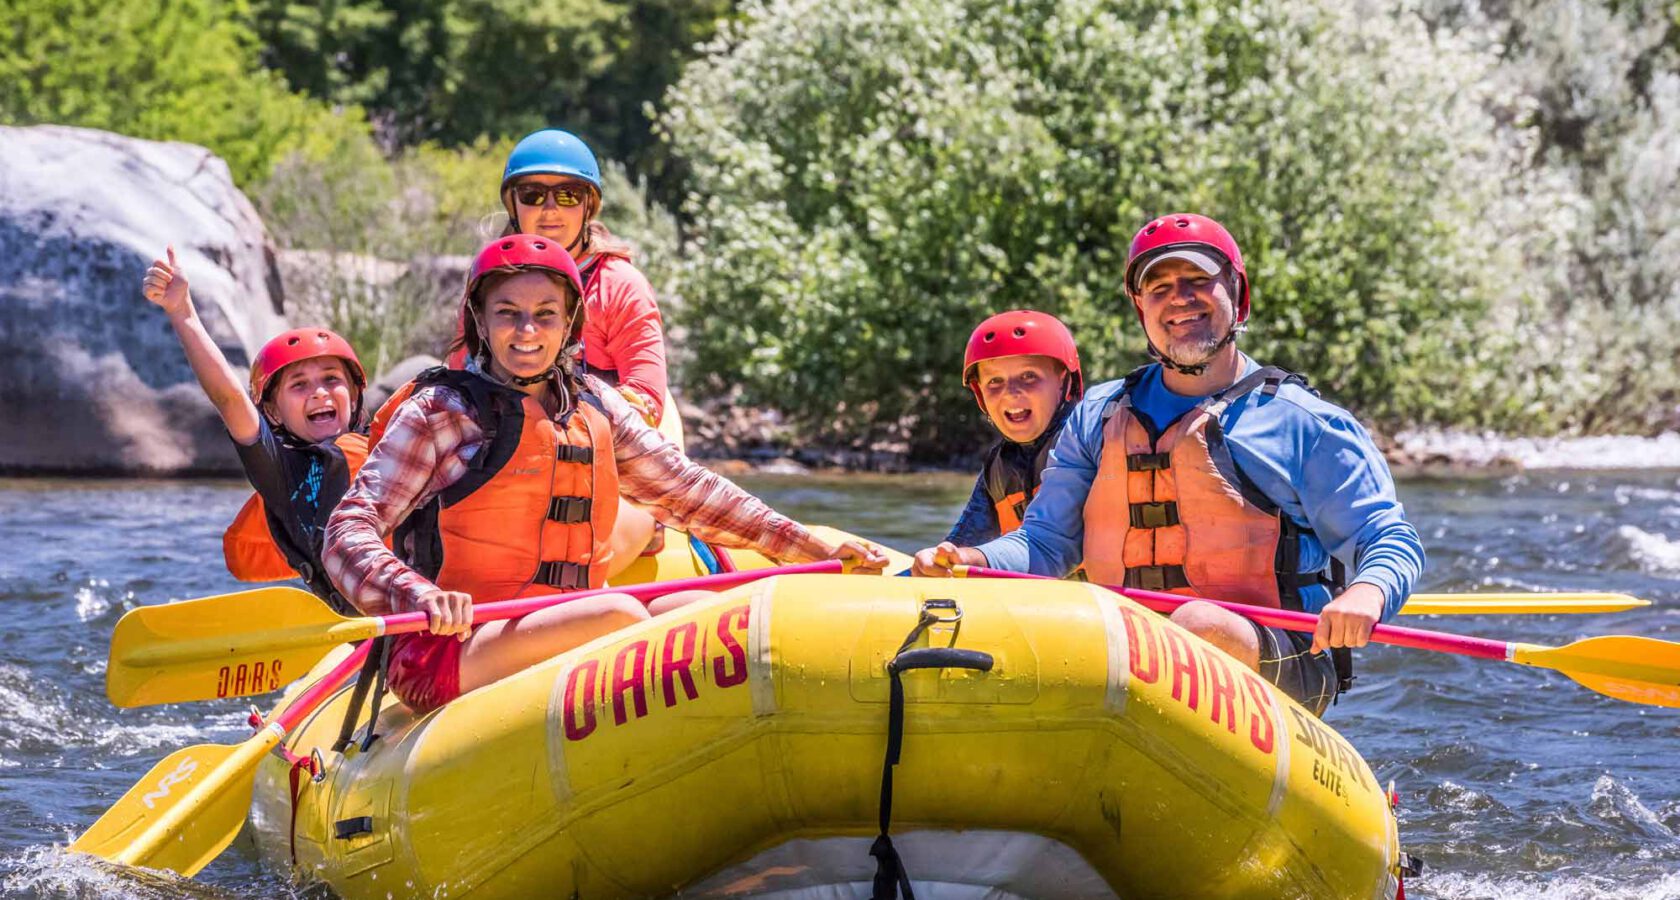 A letter to parents who've never been rafting | What you really need to know about family rafting trips